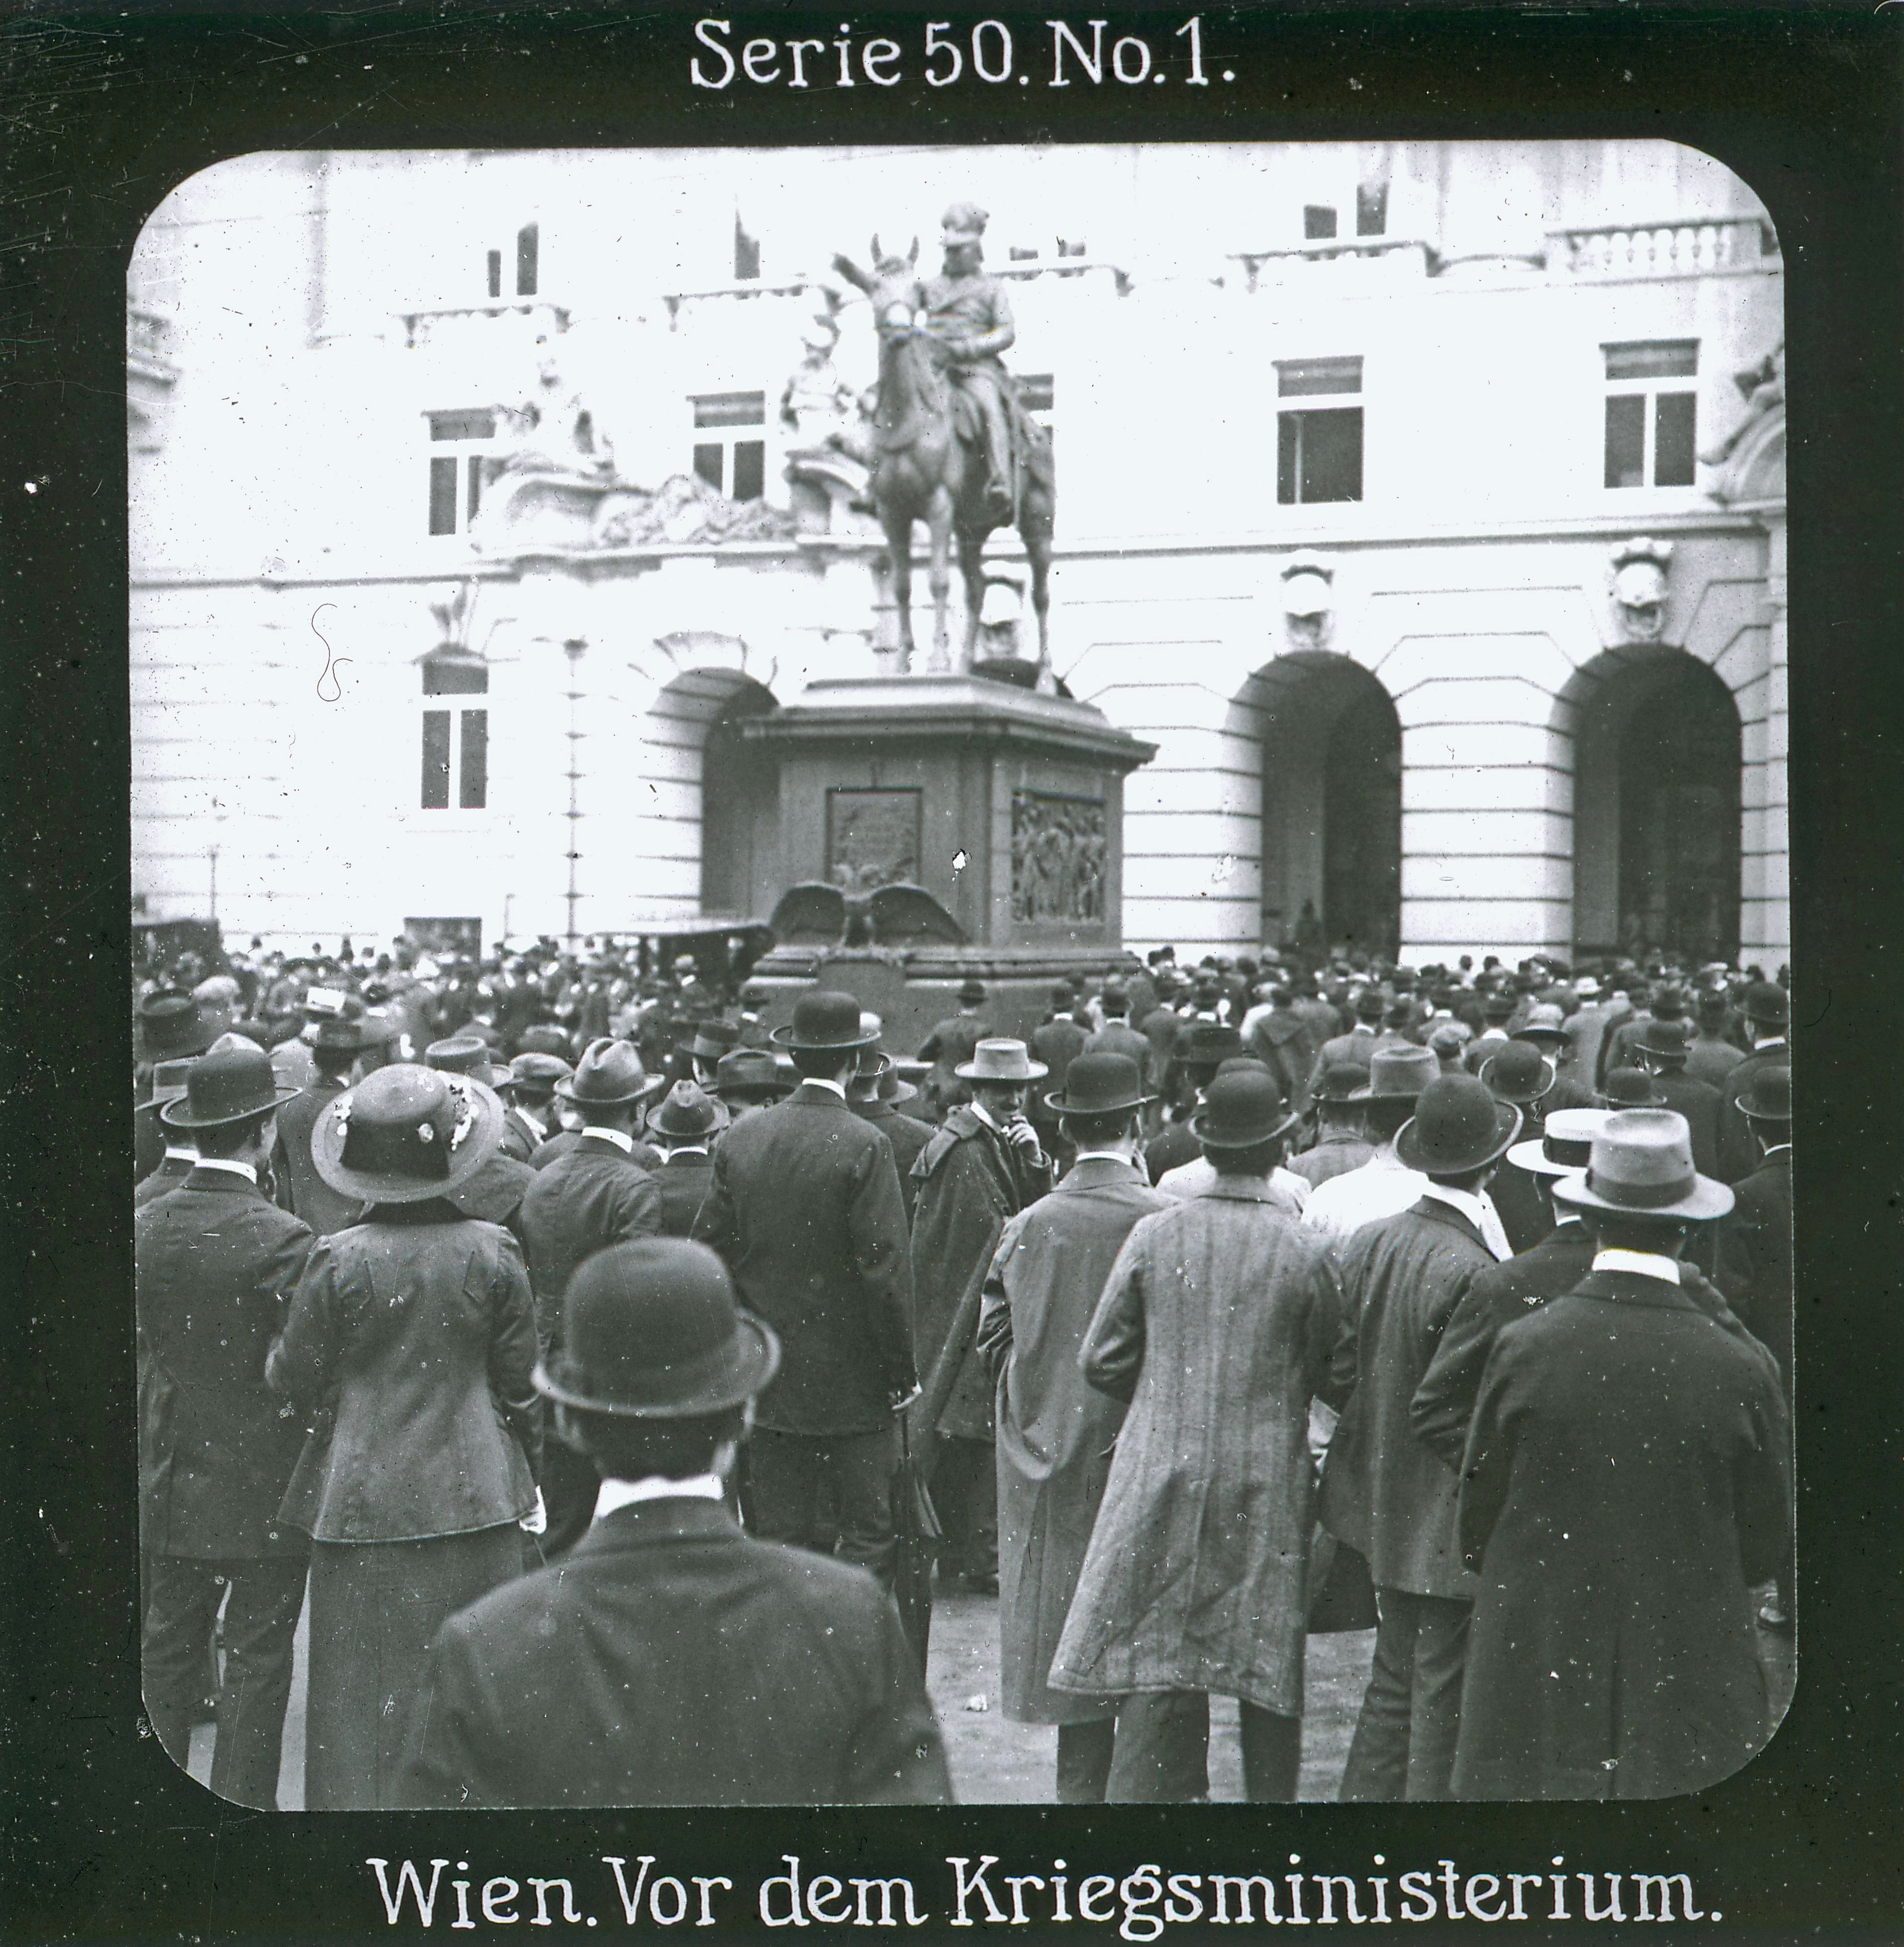 People awaiting news in front of the war ministry in Vienna, July 1914